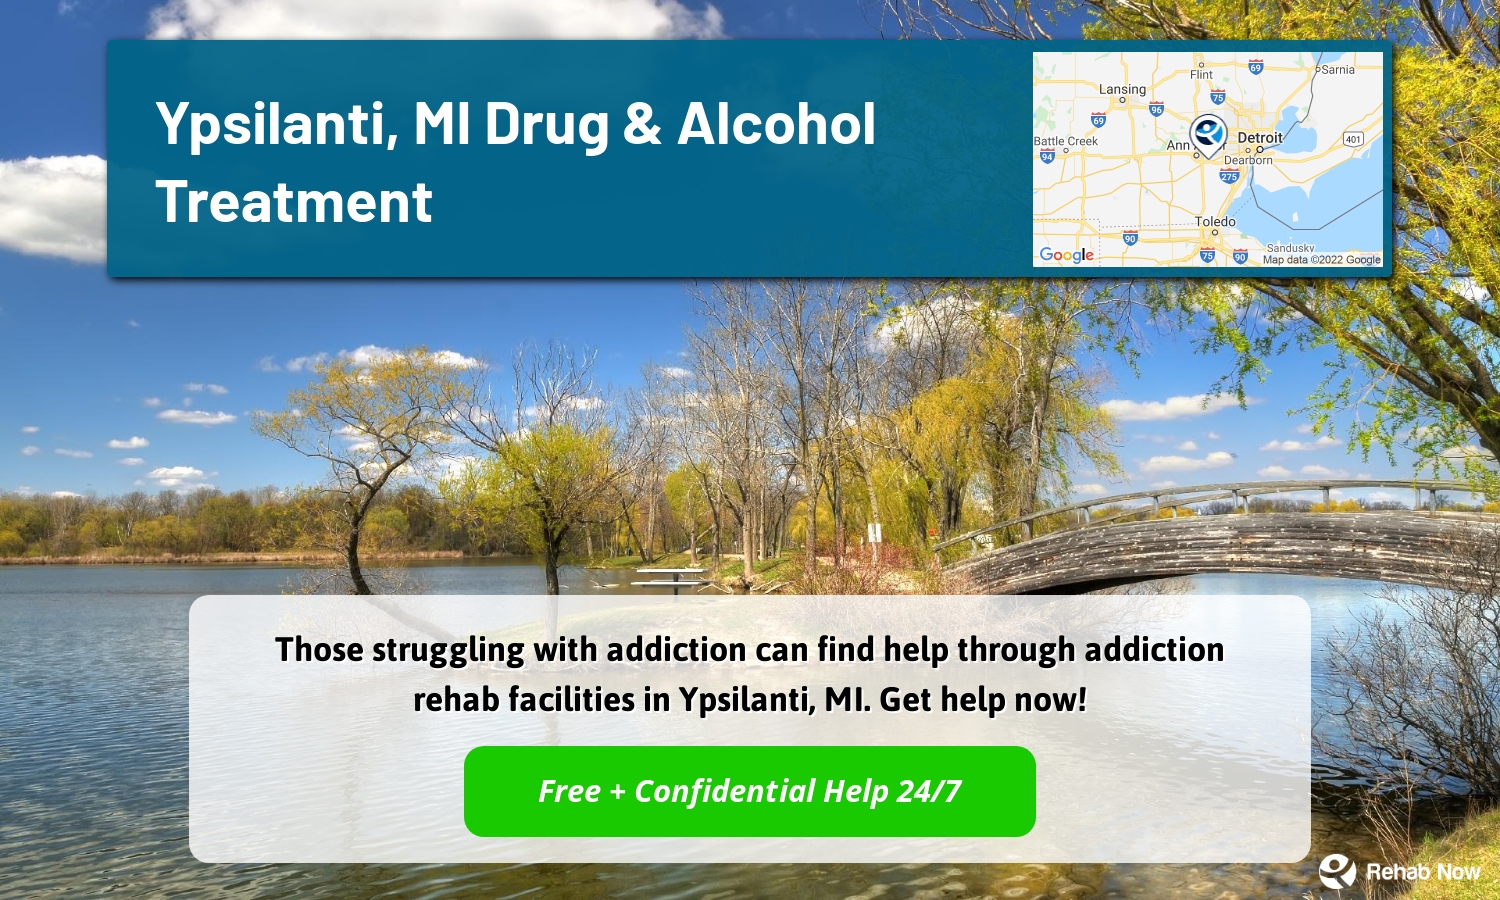 Those struggling with addiction can find help through addiction rehab facilities in Ypsilanti, MI. Get help now!